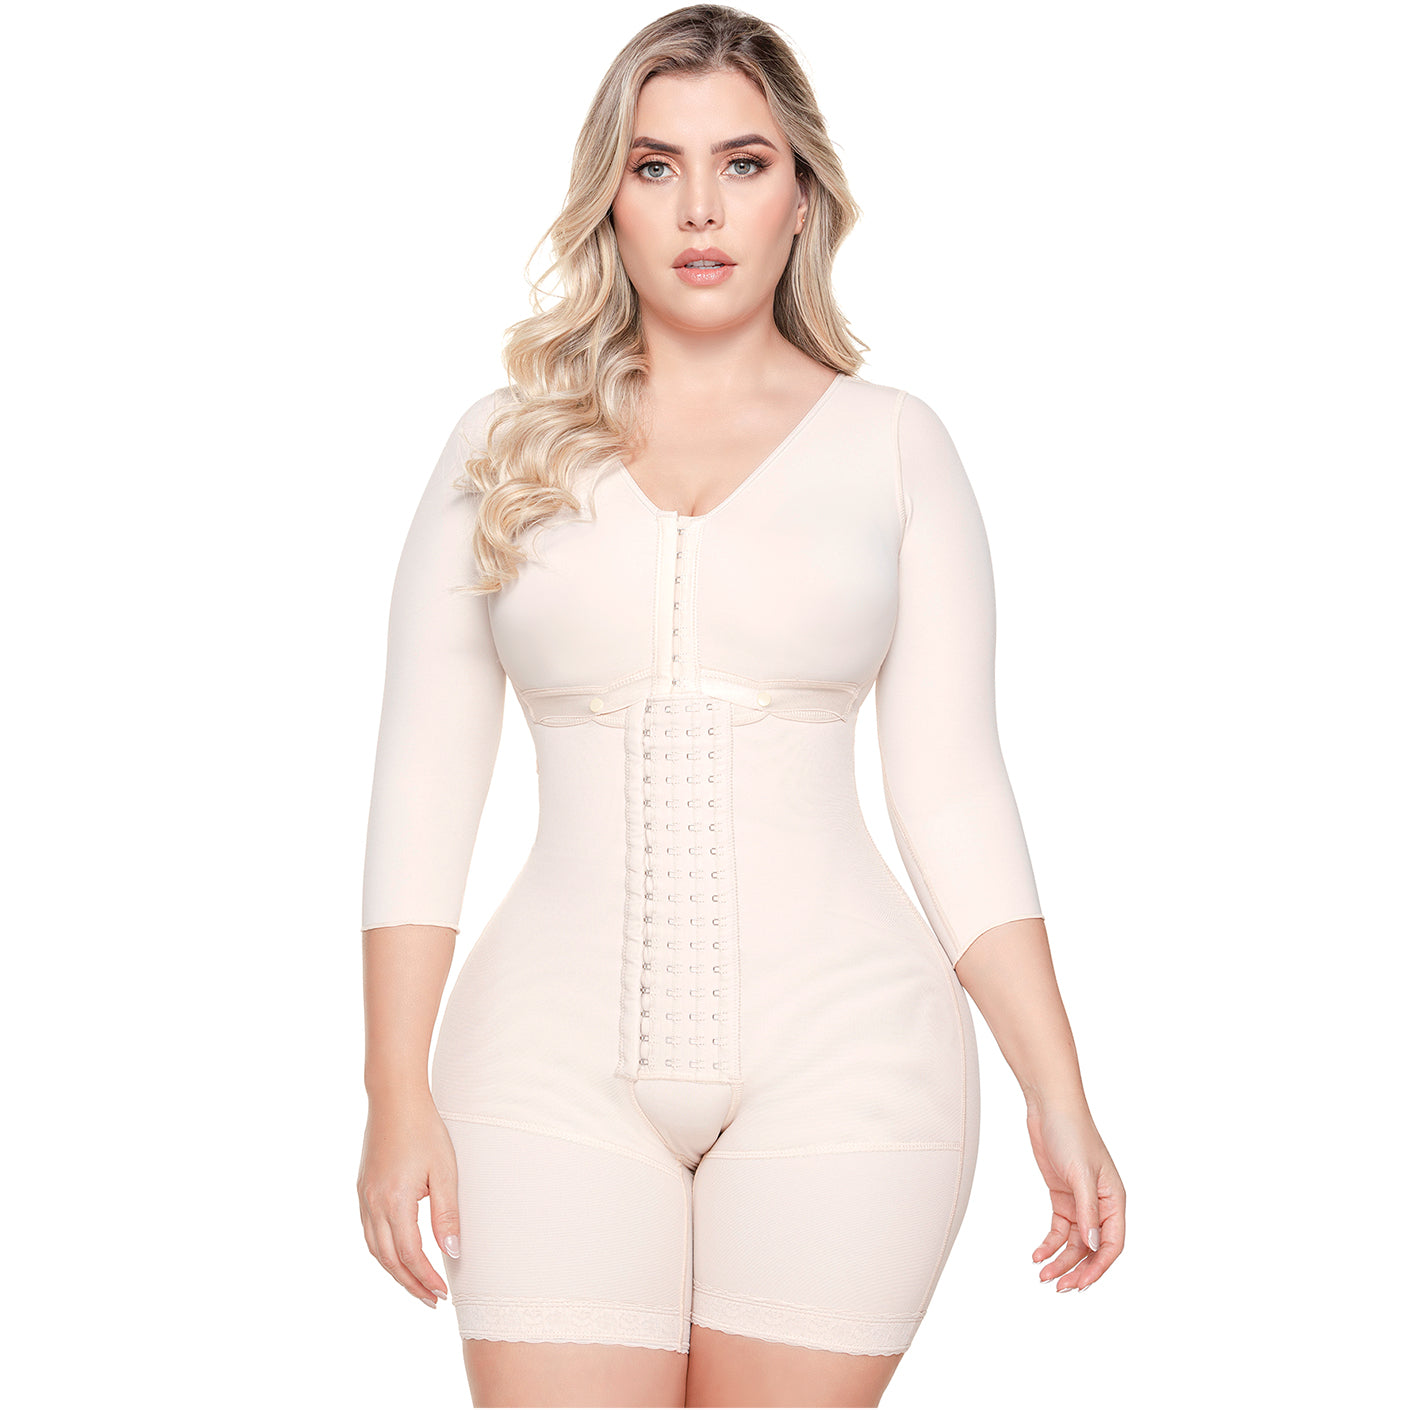 SONRYSE Faja Colombiana Postpartum and Post Surgery Extra Firm Shapewear  Girdle BBL Stage 2 Bodysuit Faja for Woman Chocolate L 